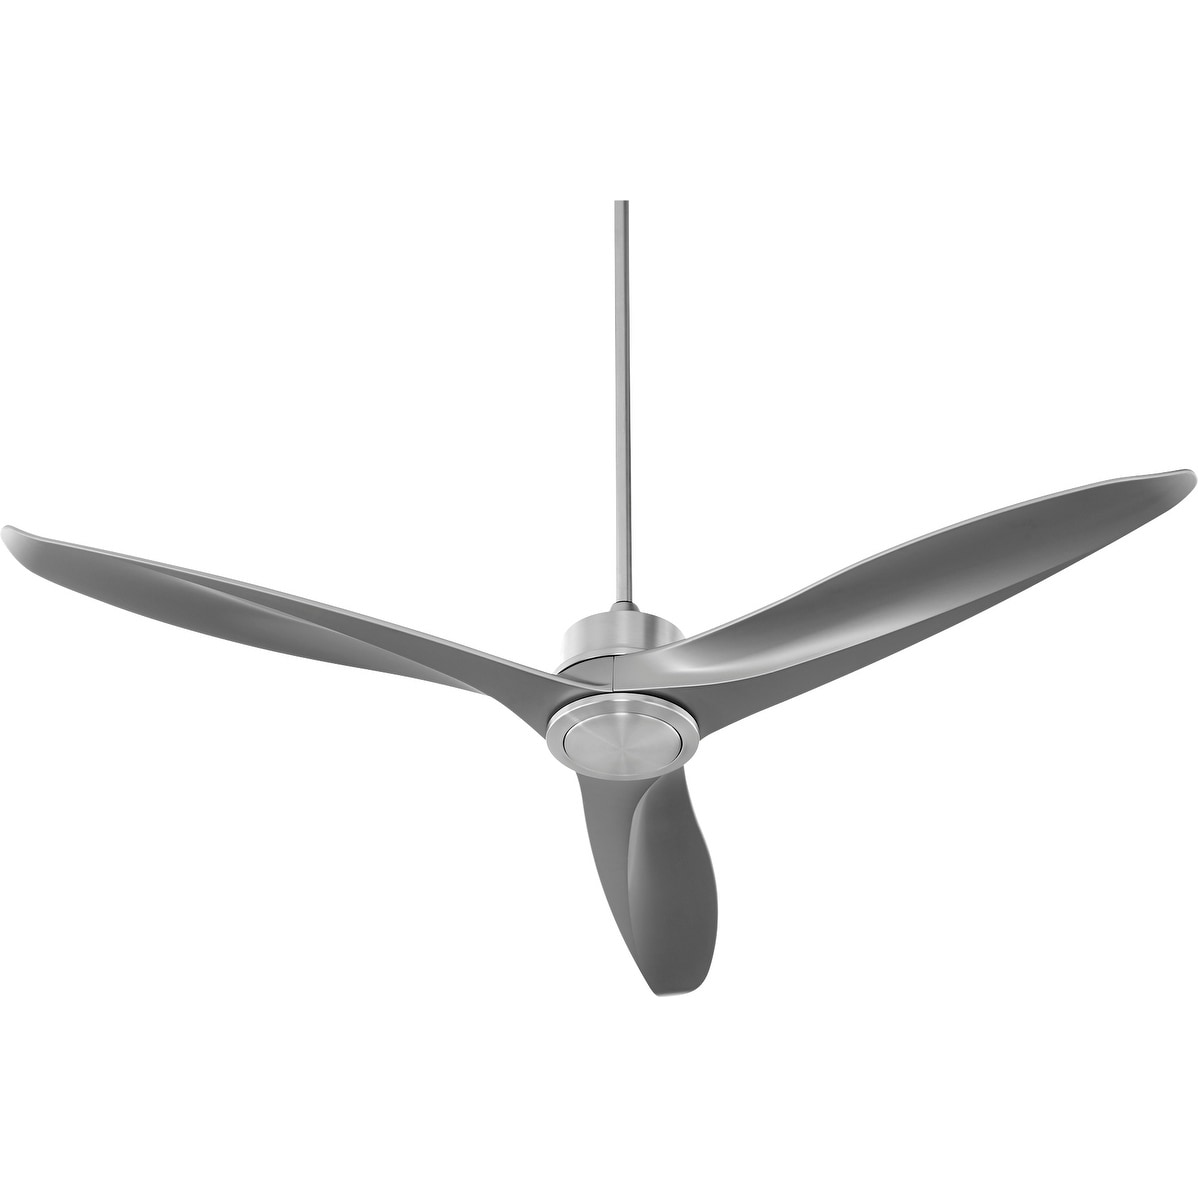 Shop Kress Led 60 Contemporary Ceiling Fan With Integraded Led